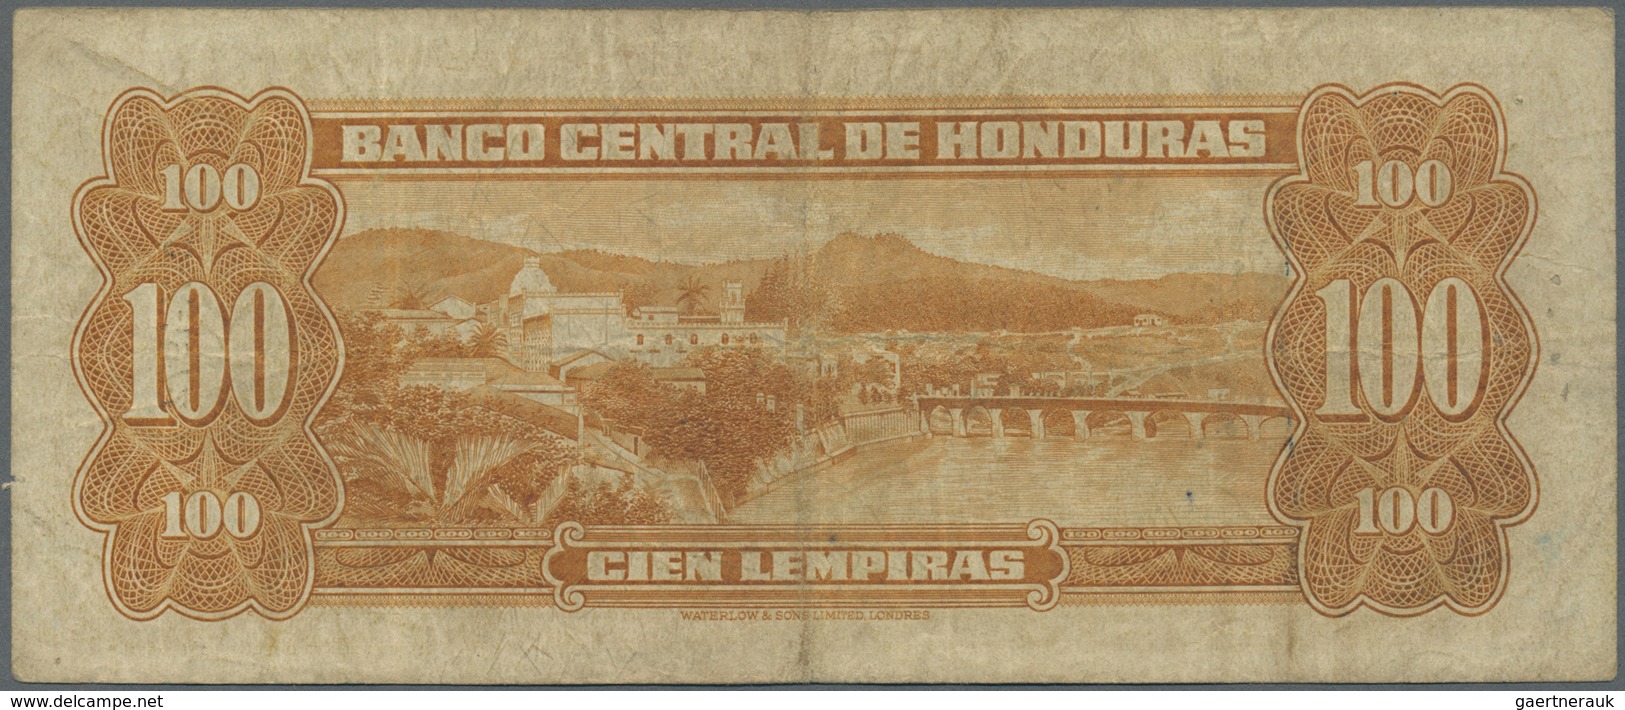 Honduras: 100 Lempiras 1972 P. 49d, Used With Folds And Creases, Stained Paper, 2 Pinholes, But No T - Honduras